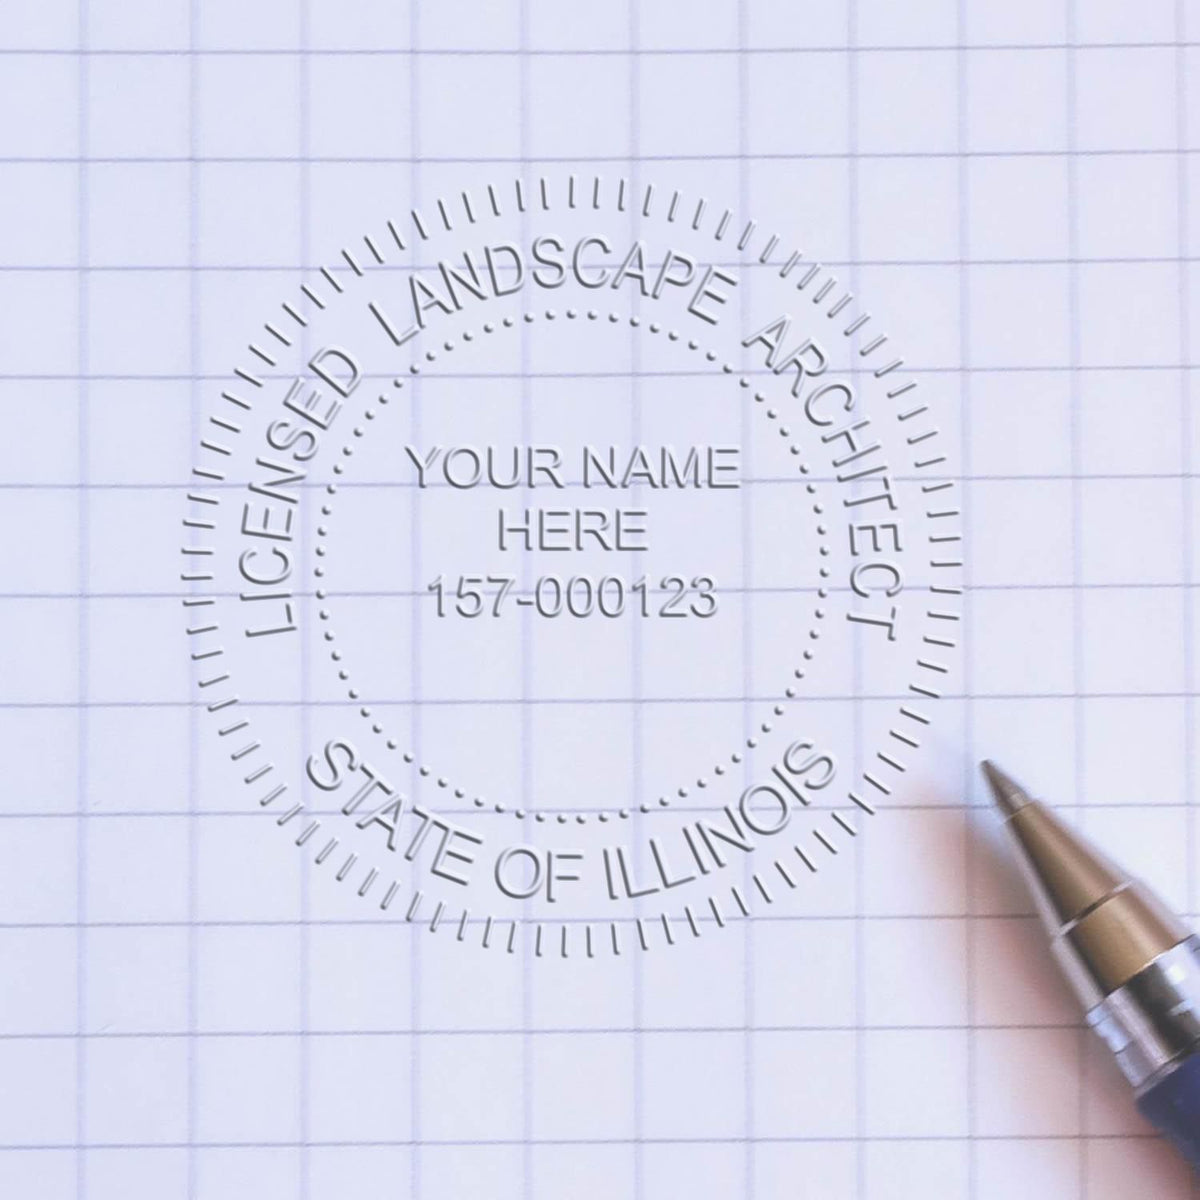 An in use photo of the Hybrid Illinois Landscape Architect Seal showing a sample imprint on a cardstock